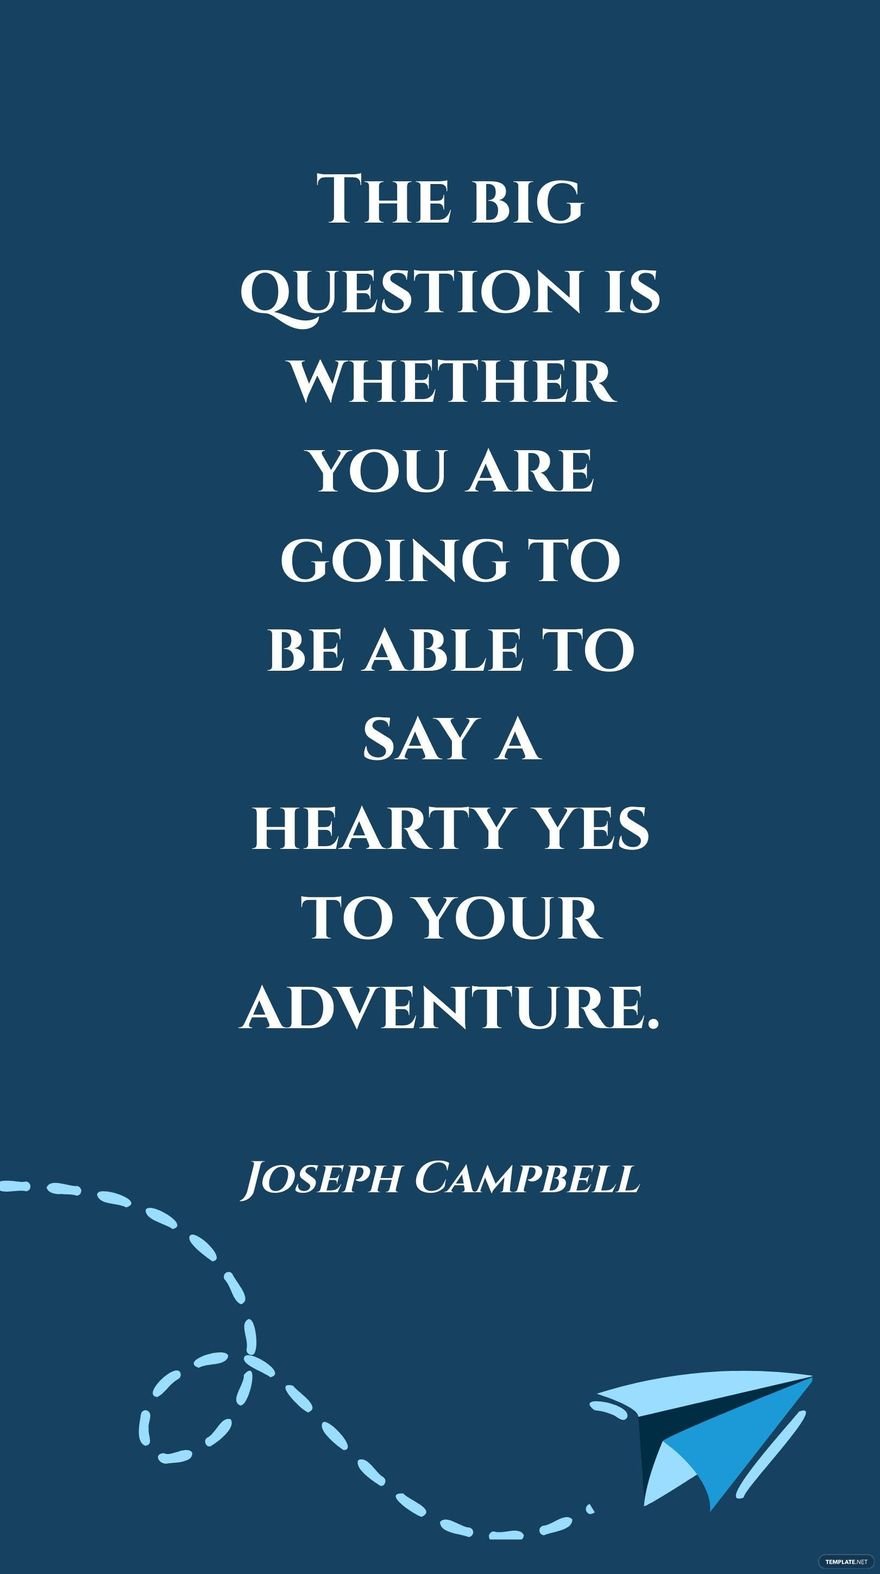 Joseph Campbell - The big question is whether you are going to be able to say a hearty yes to your adventure.